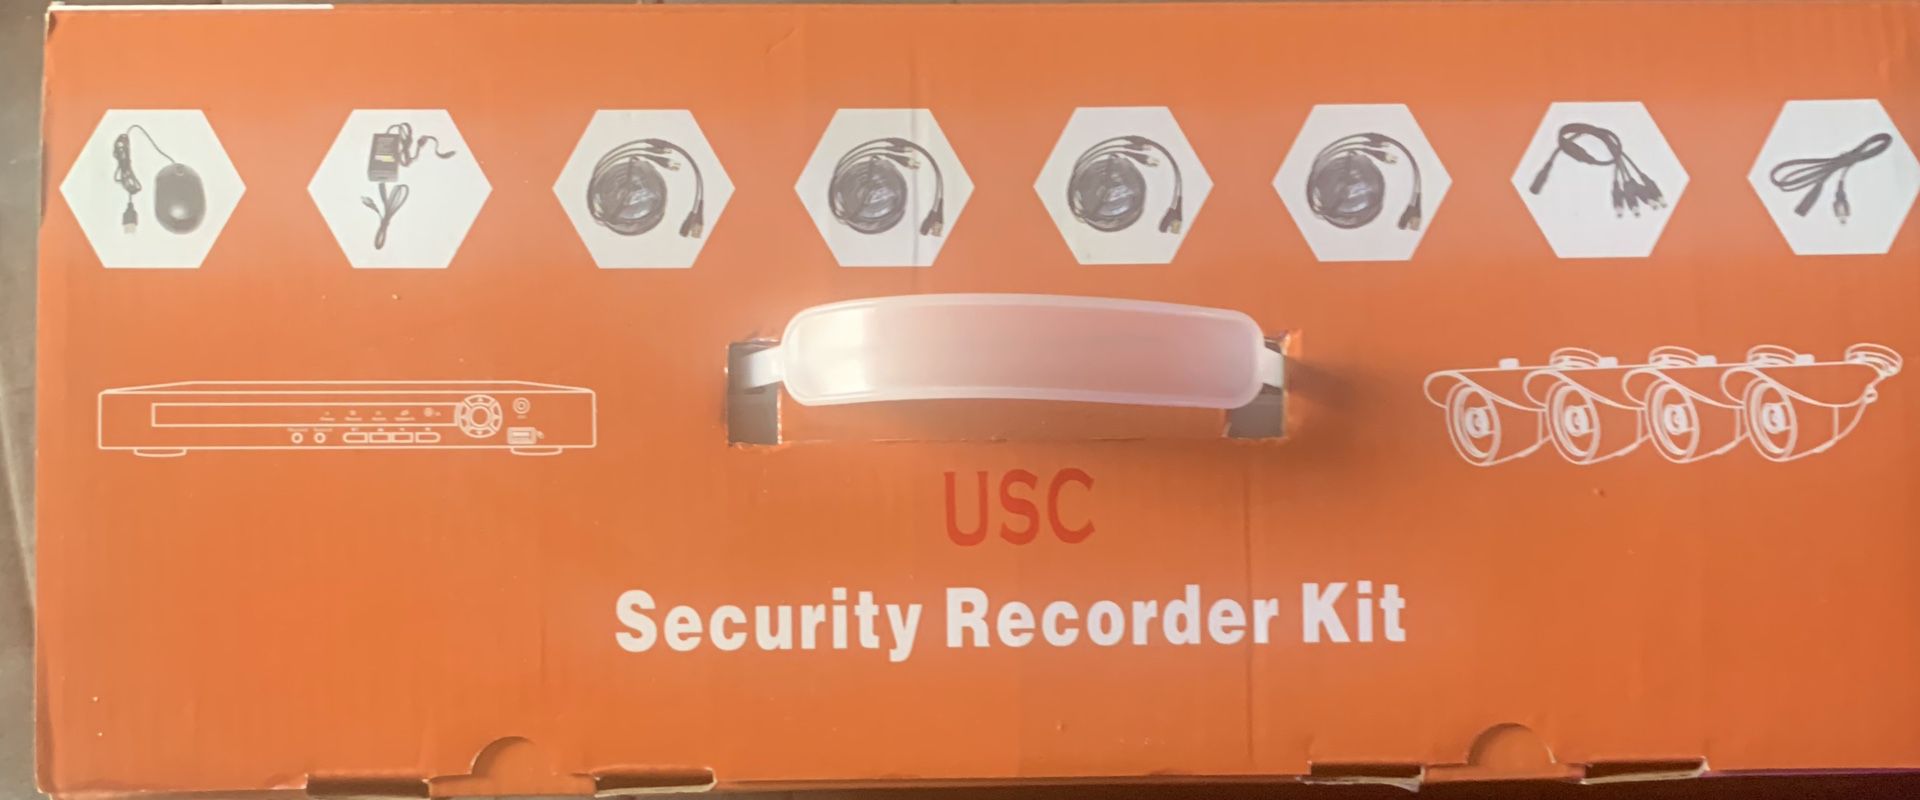 USC security recorder kit